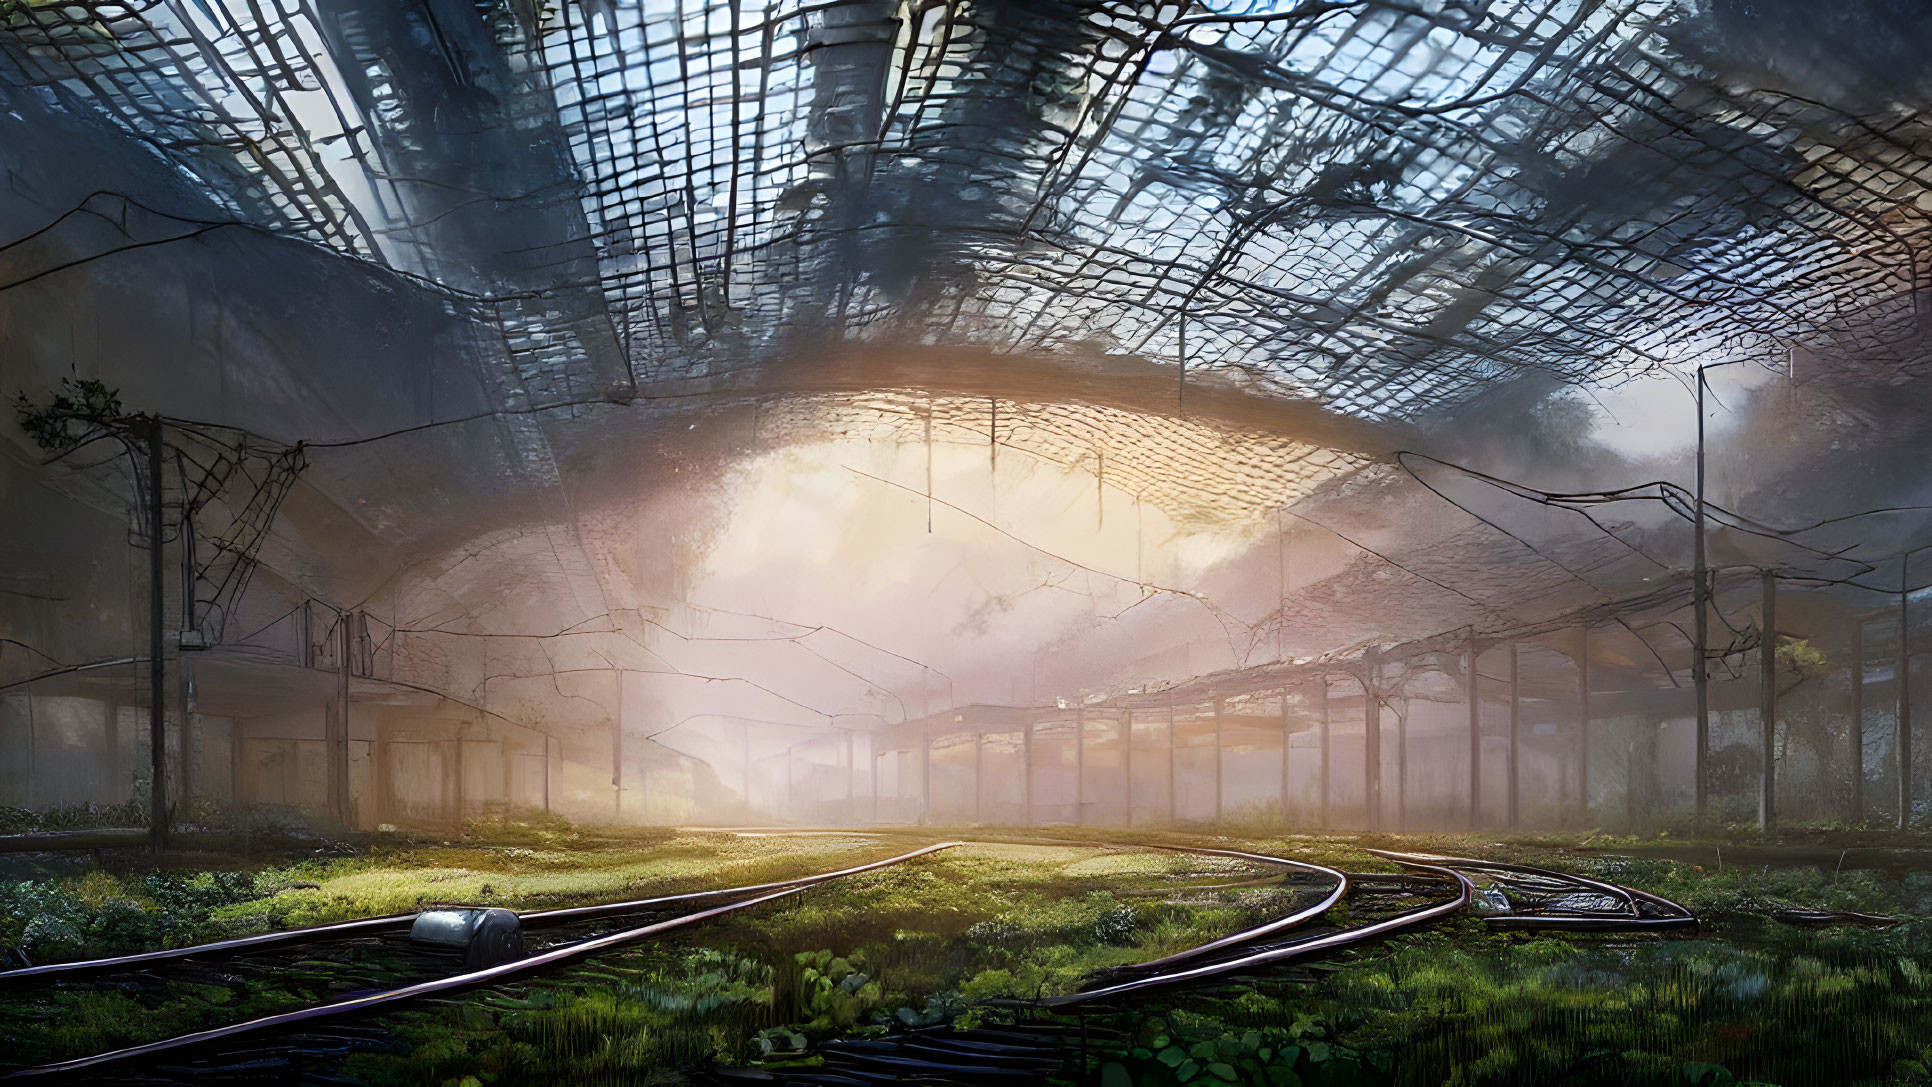 Overgrown abandoned railway station with dilapidated glass roof and distant tracks.